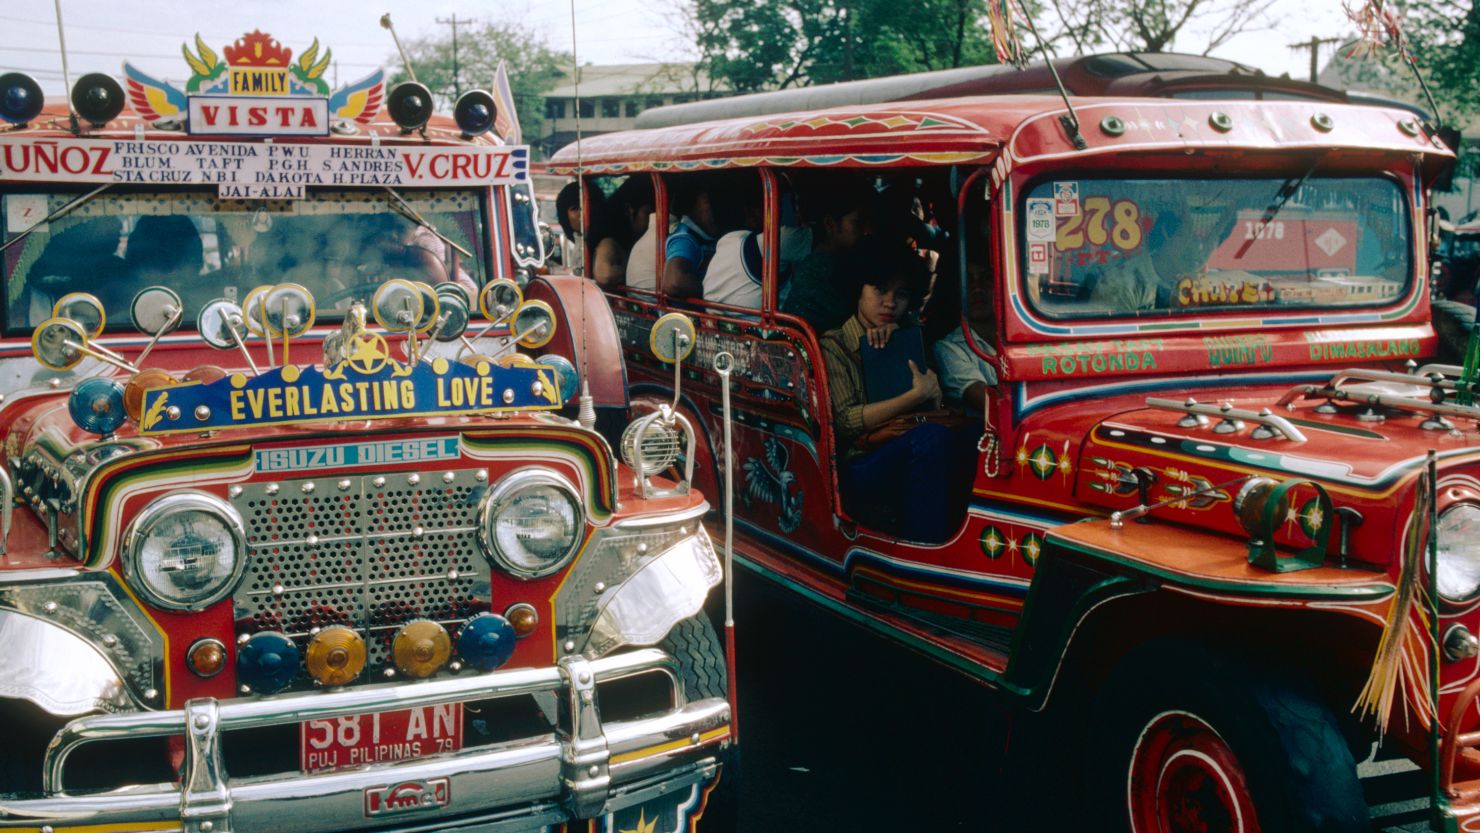 Jeepneys are the result of recycling US army jeeps left in the Philippines after World War II. Each jeepney has a different owner, and great care is paid to the way in which they are decorated. (Photo by Alain Nogues/Sygma/Sygma via Getty Images)